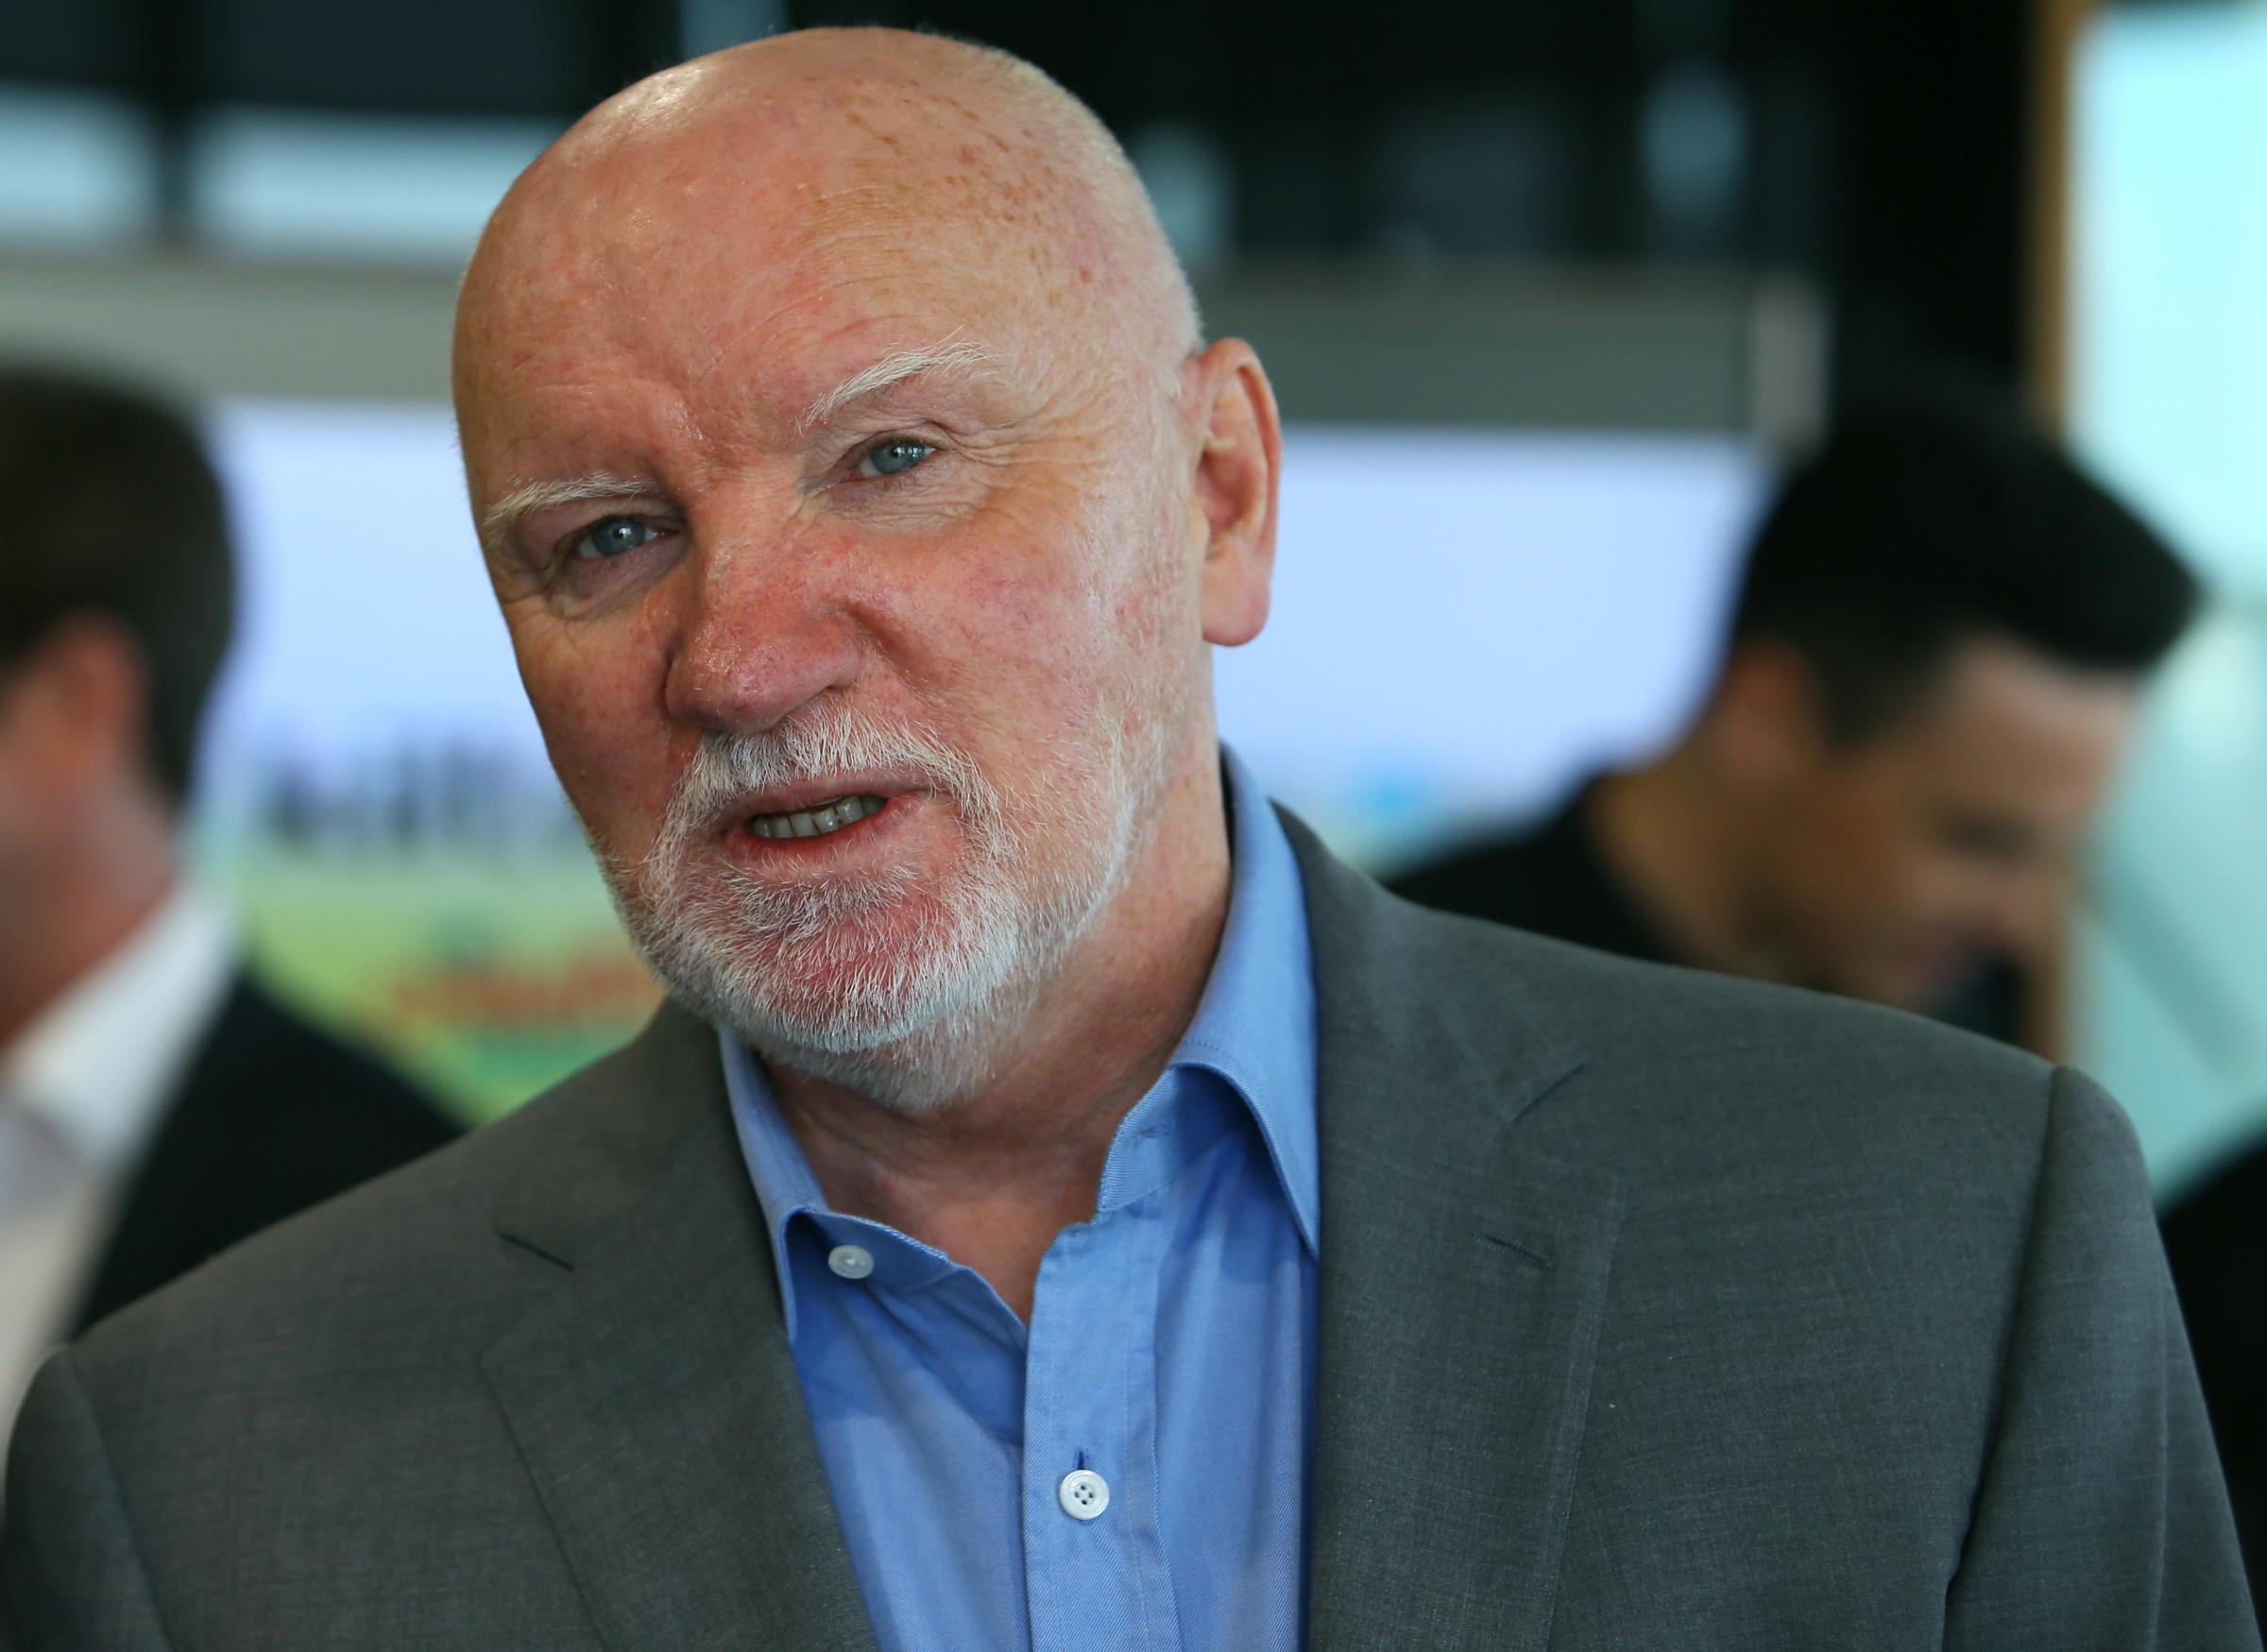 Sir Tom Hunter is backing The Herald Covid memorial campaign